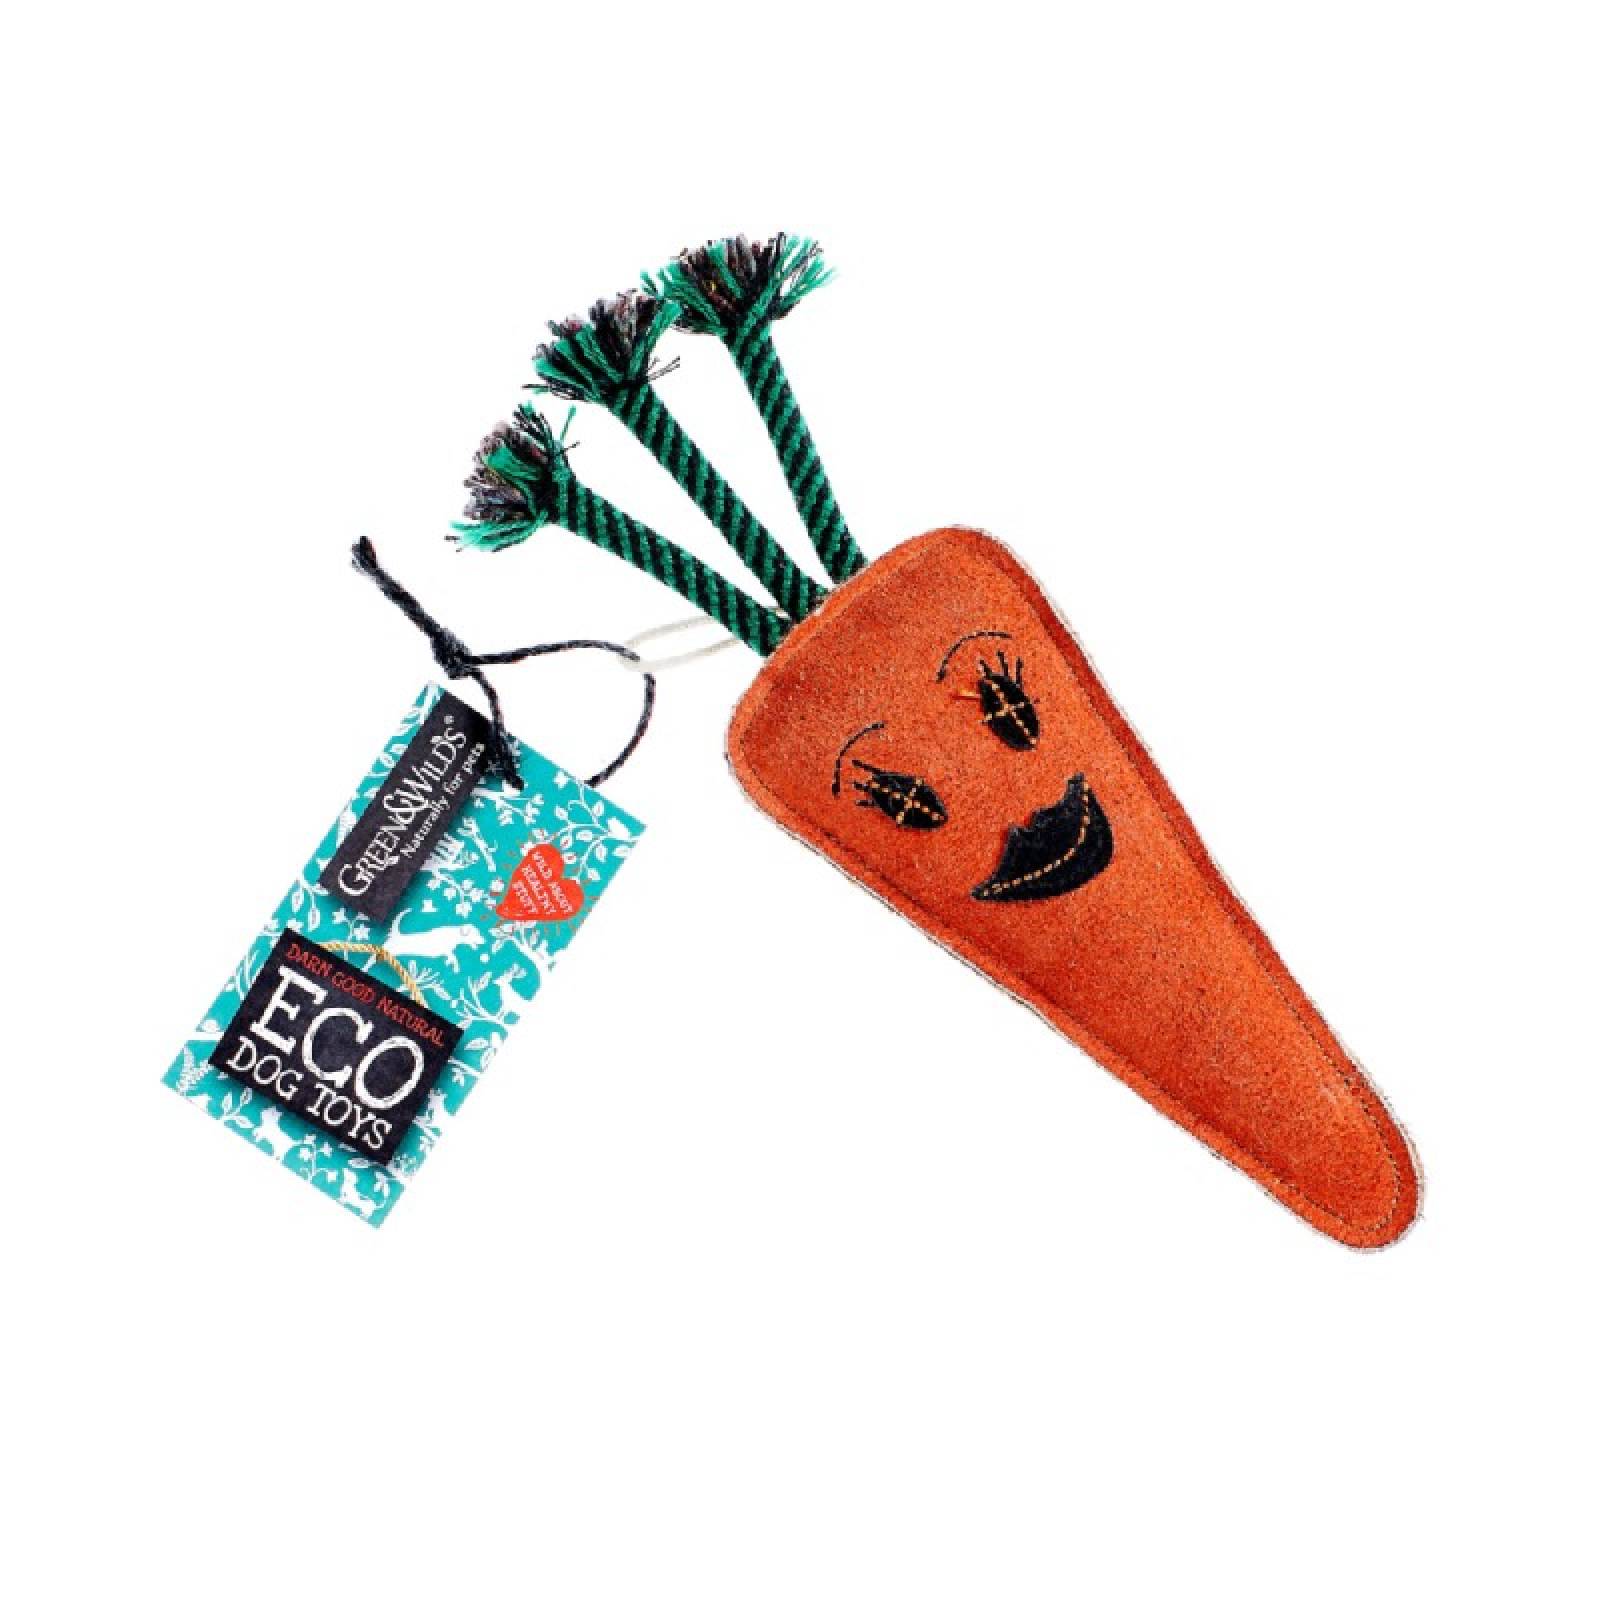 Candice The Carrot Eco Dog Toy thumbnails